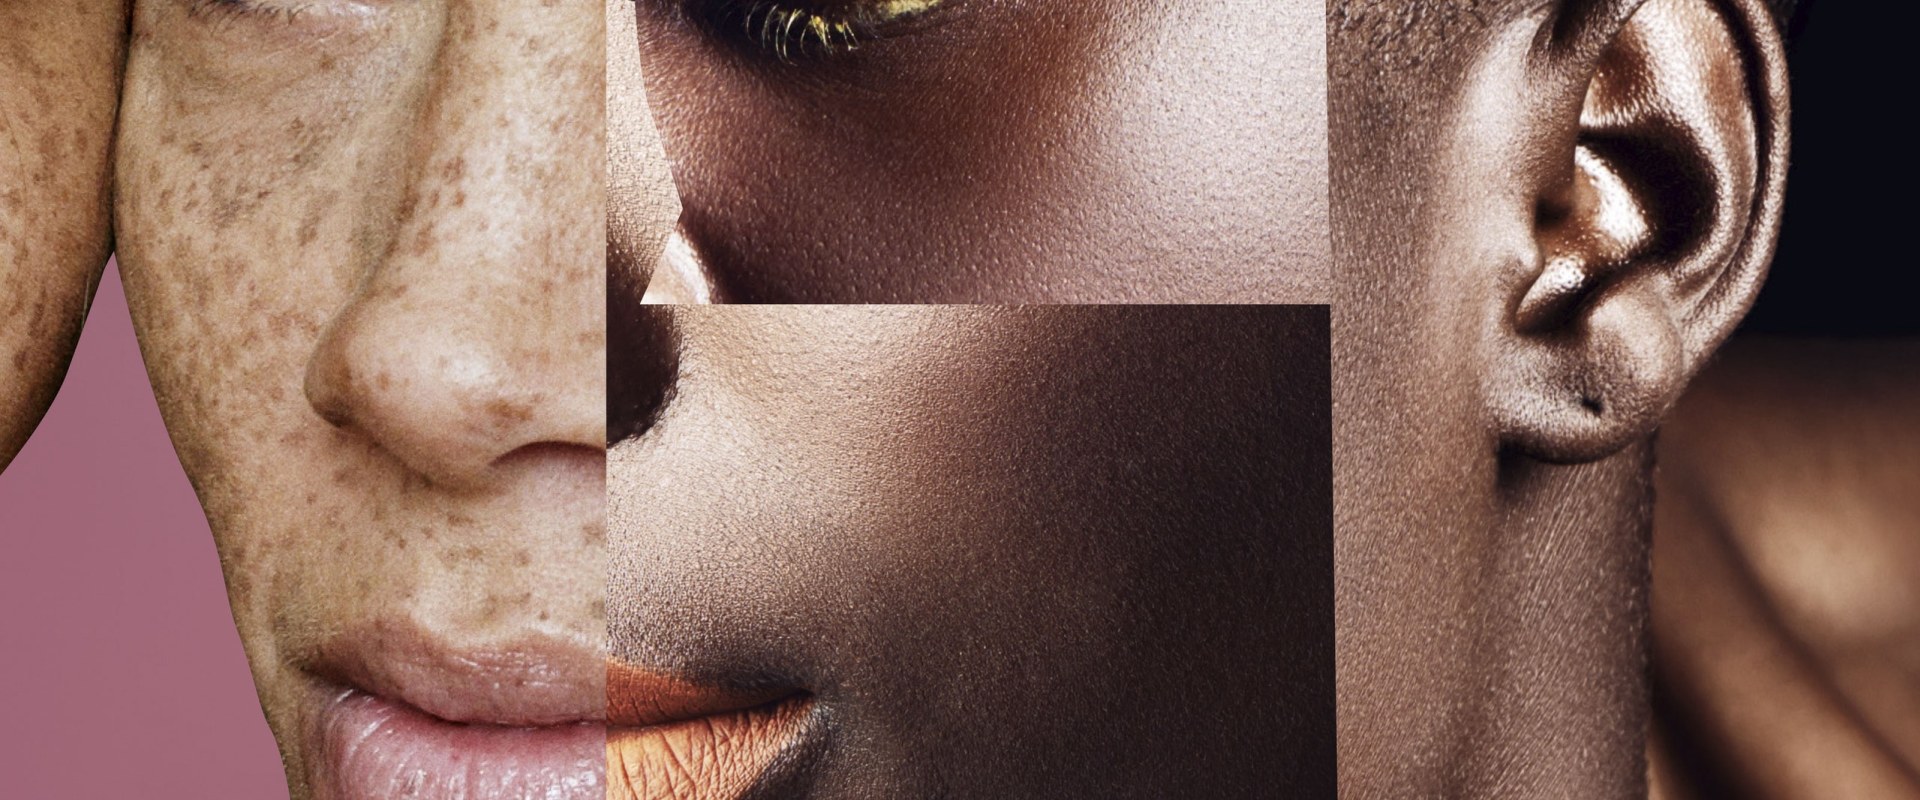 Special Considerations for People with Darker Skin Tones Considering Aesthetic Surgery